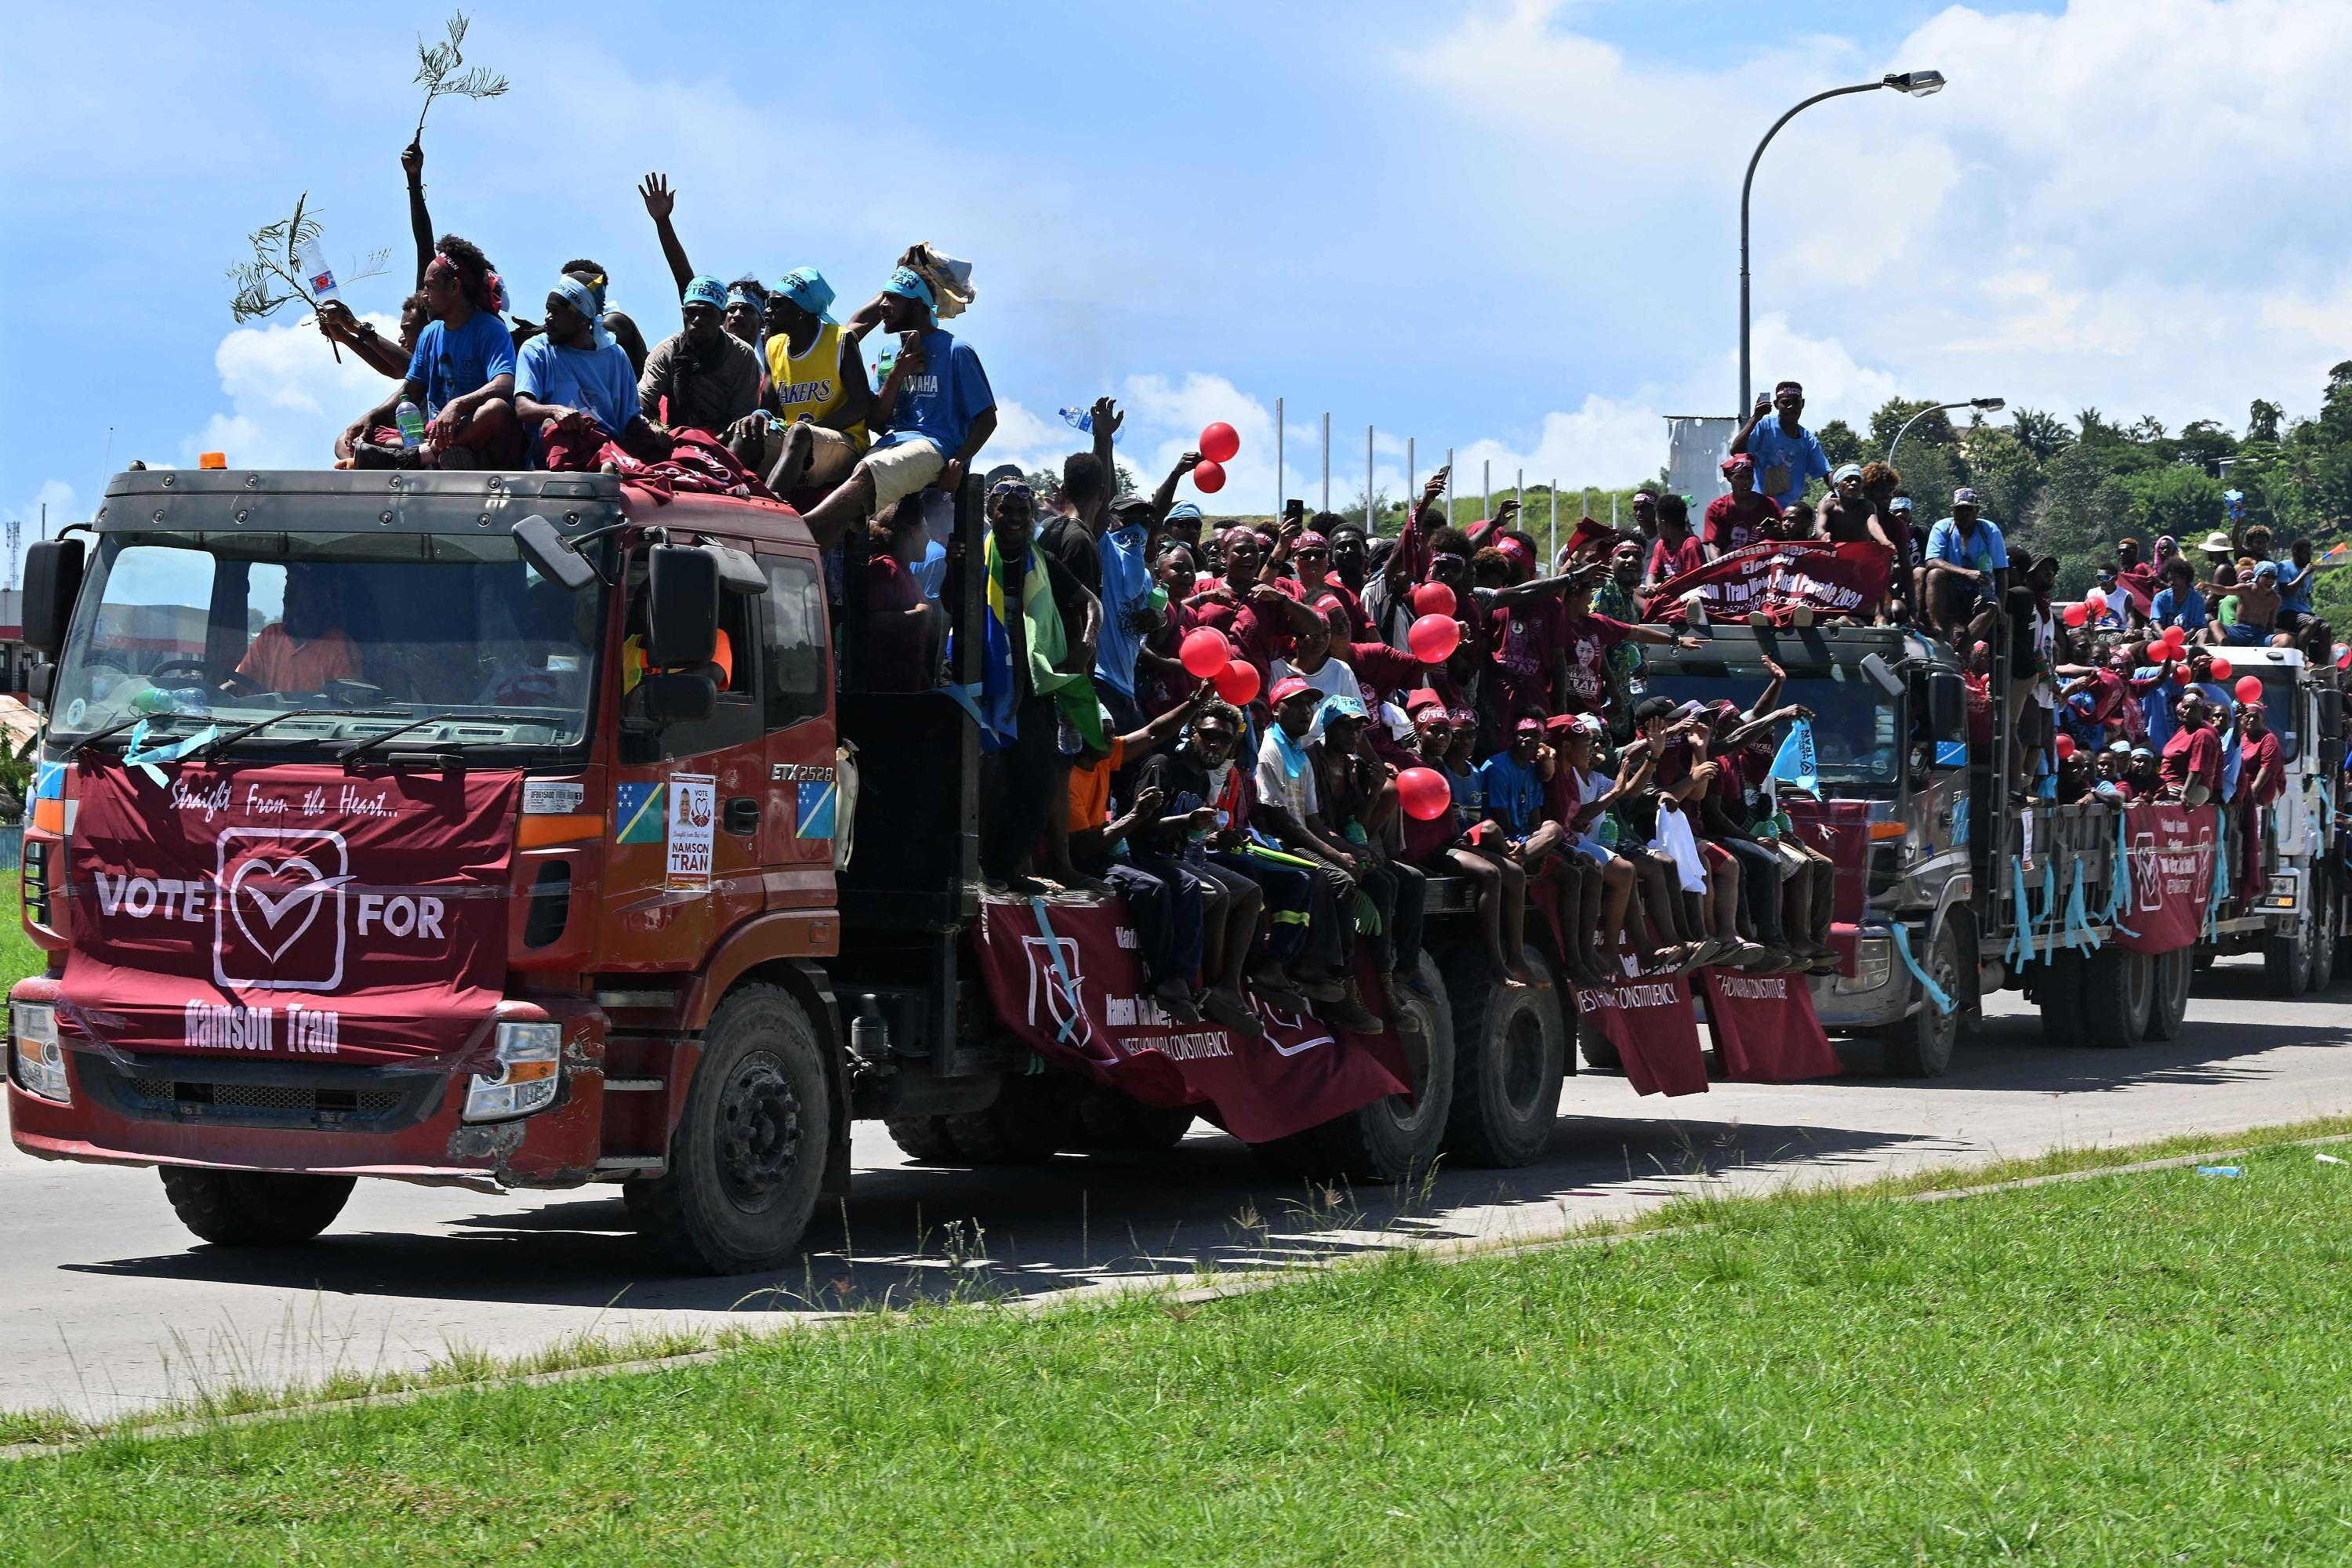 In the Solomon Islands, legislative elections crucial for security in the Pacific